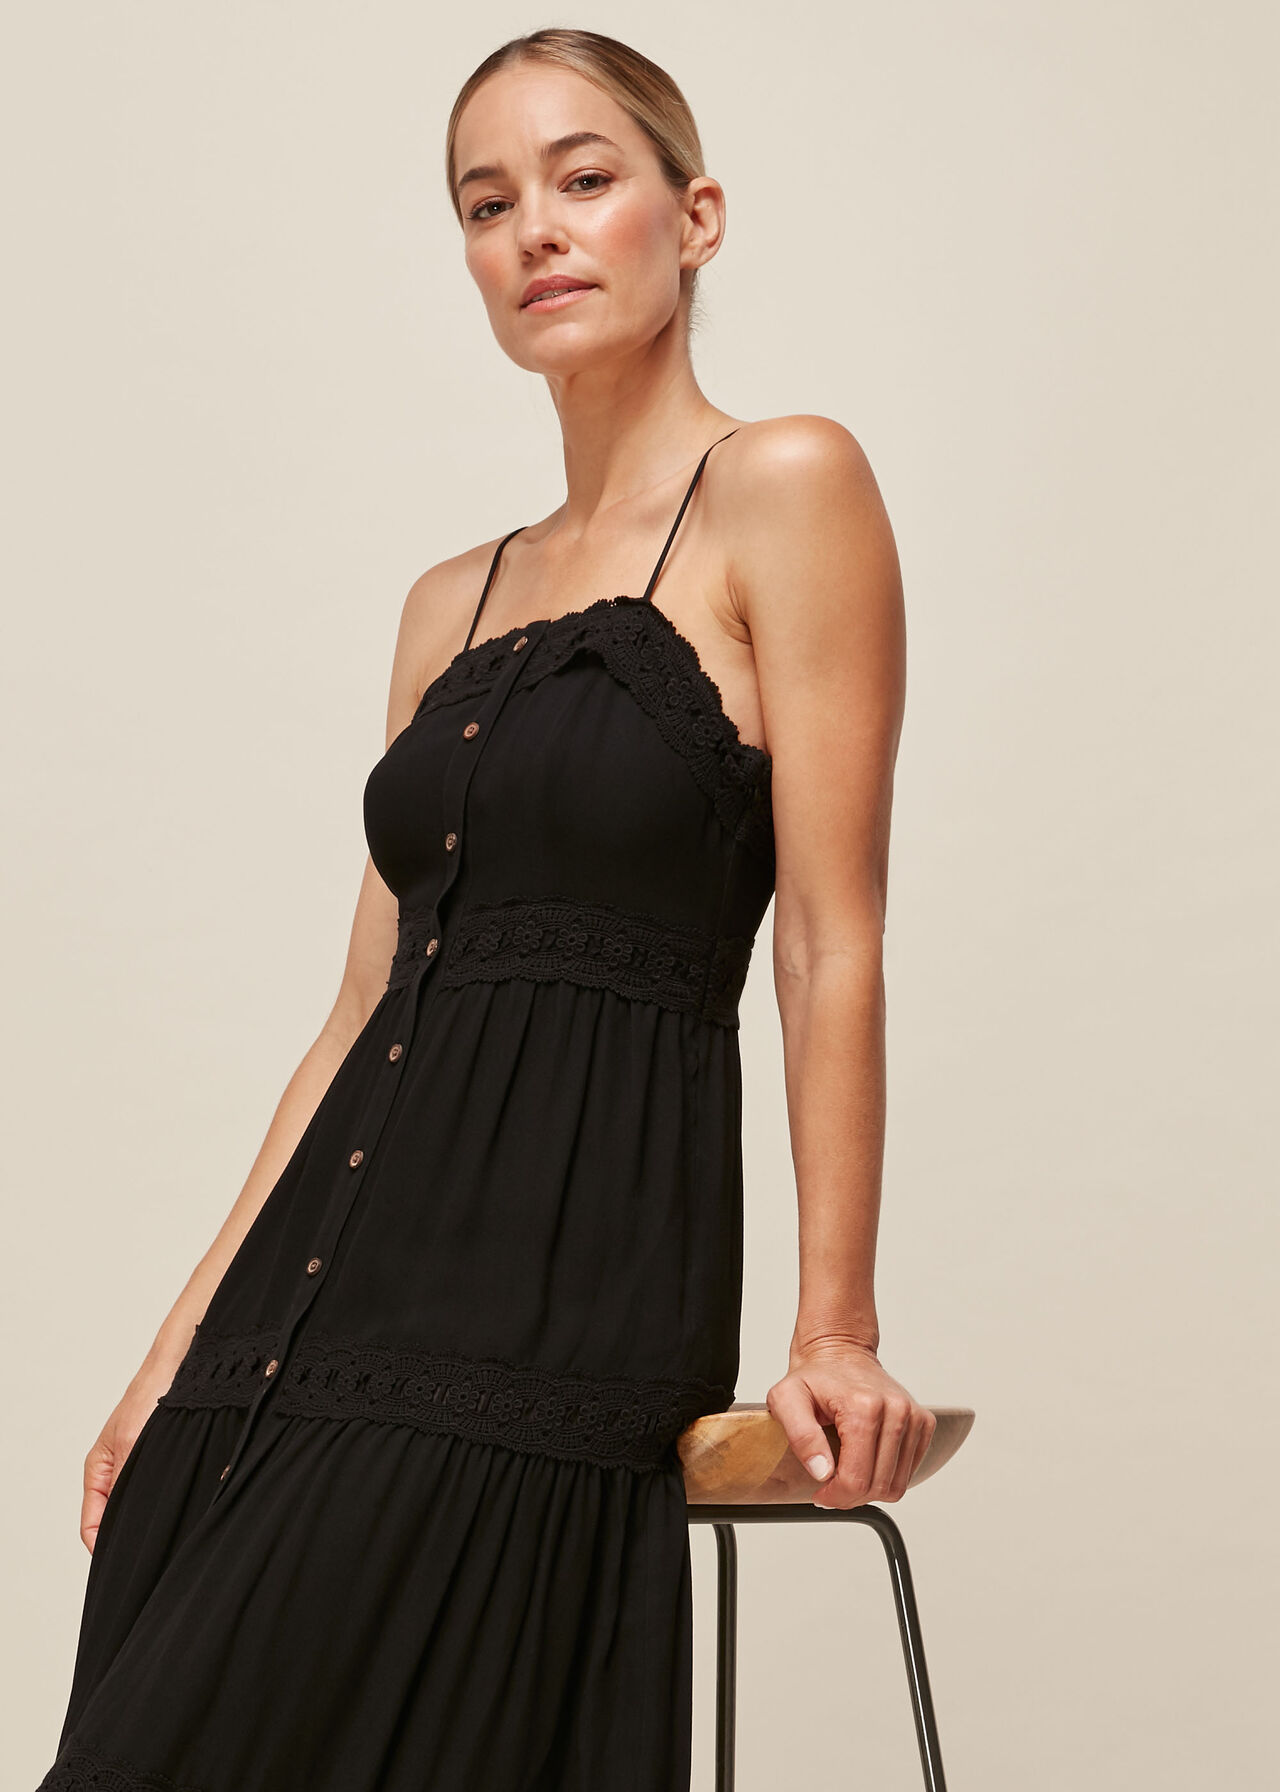 Black Strappy Lace Paneled Dress WHISTLES Whistles